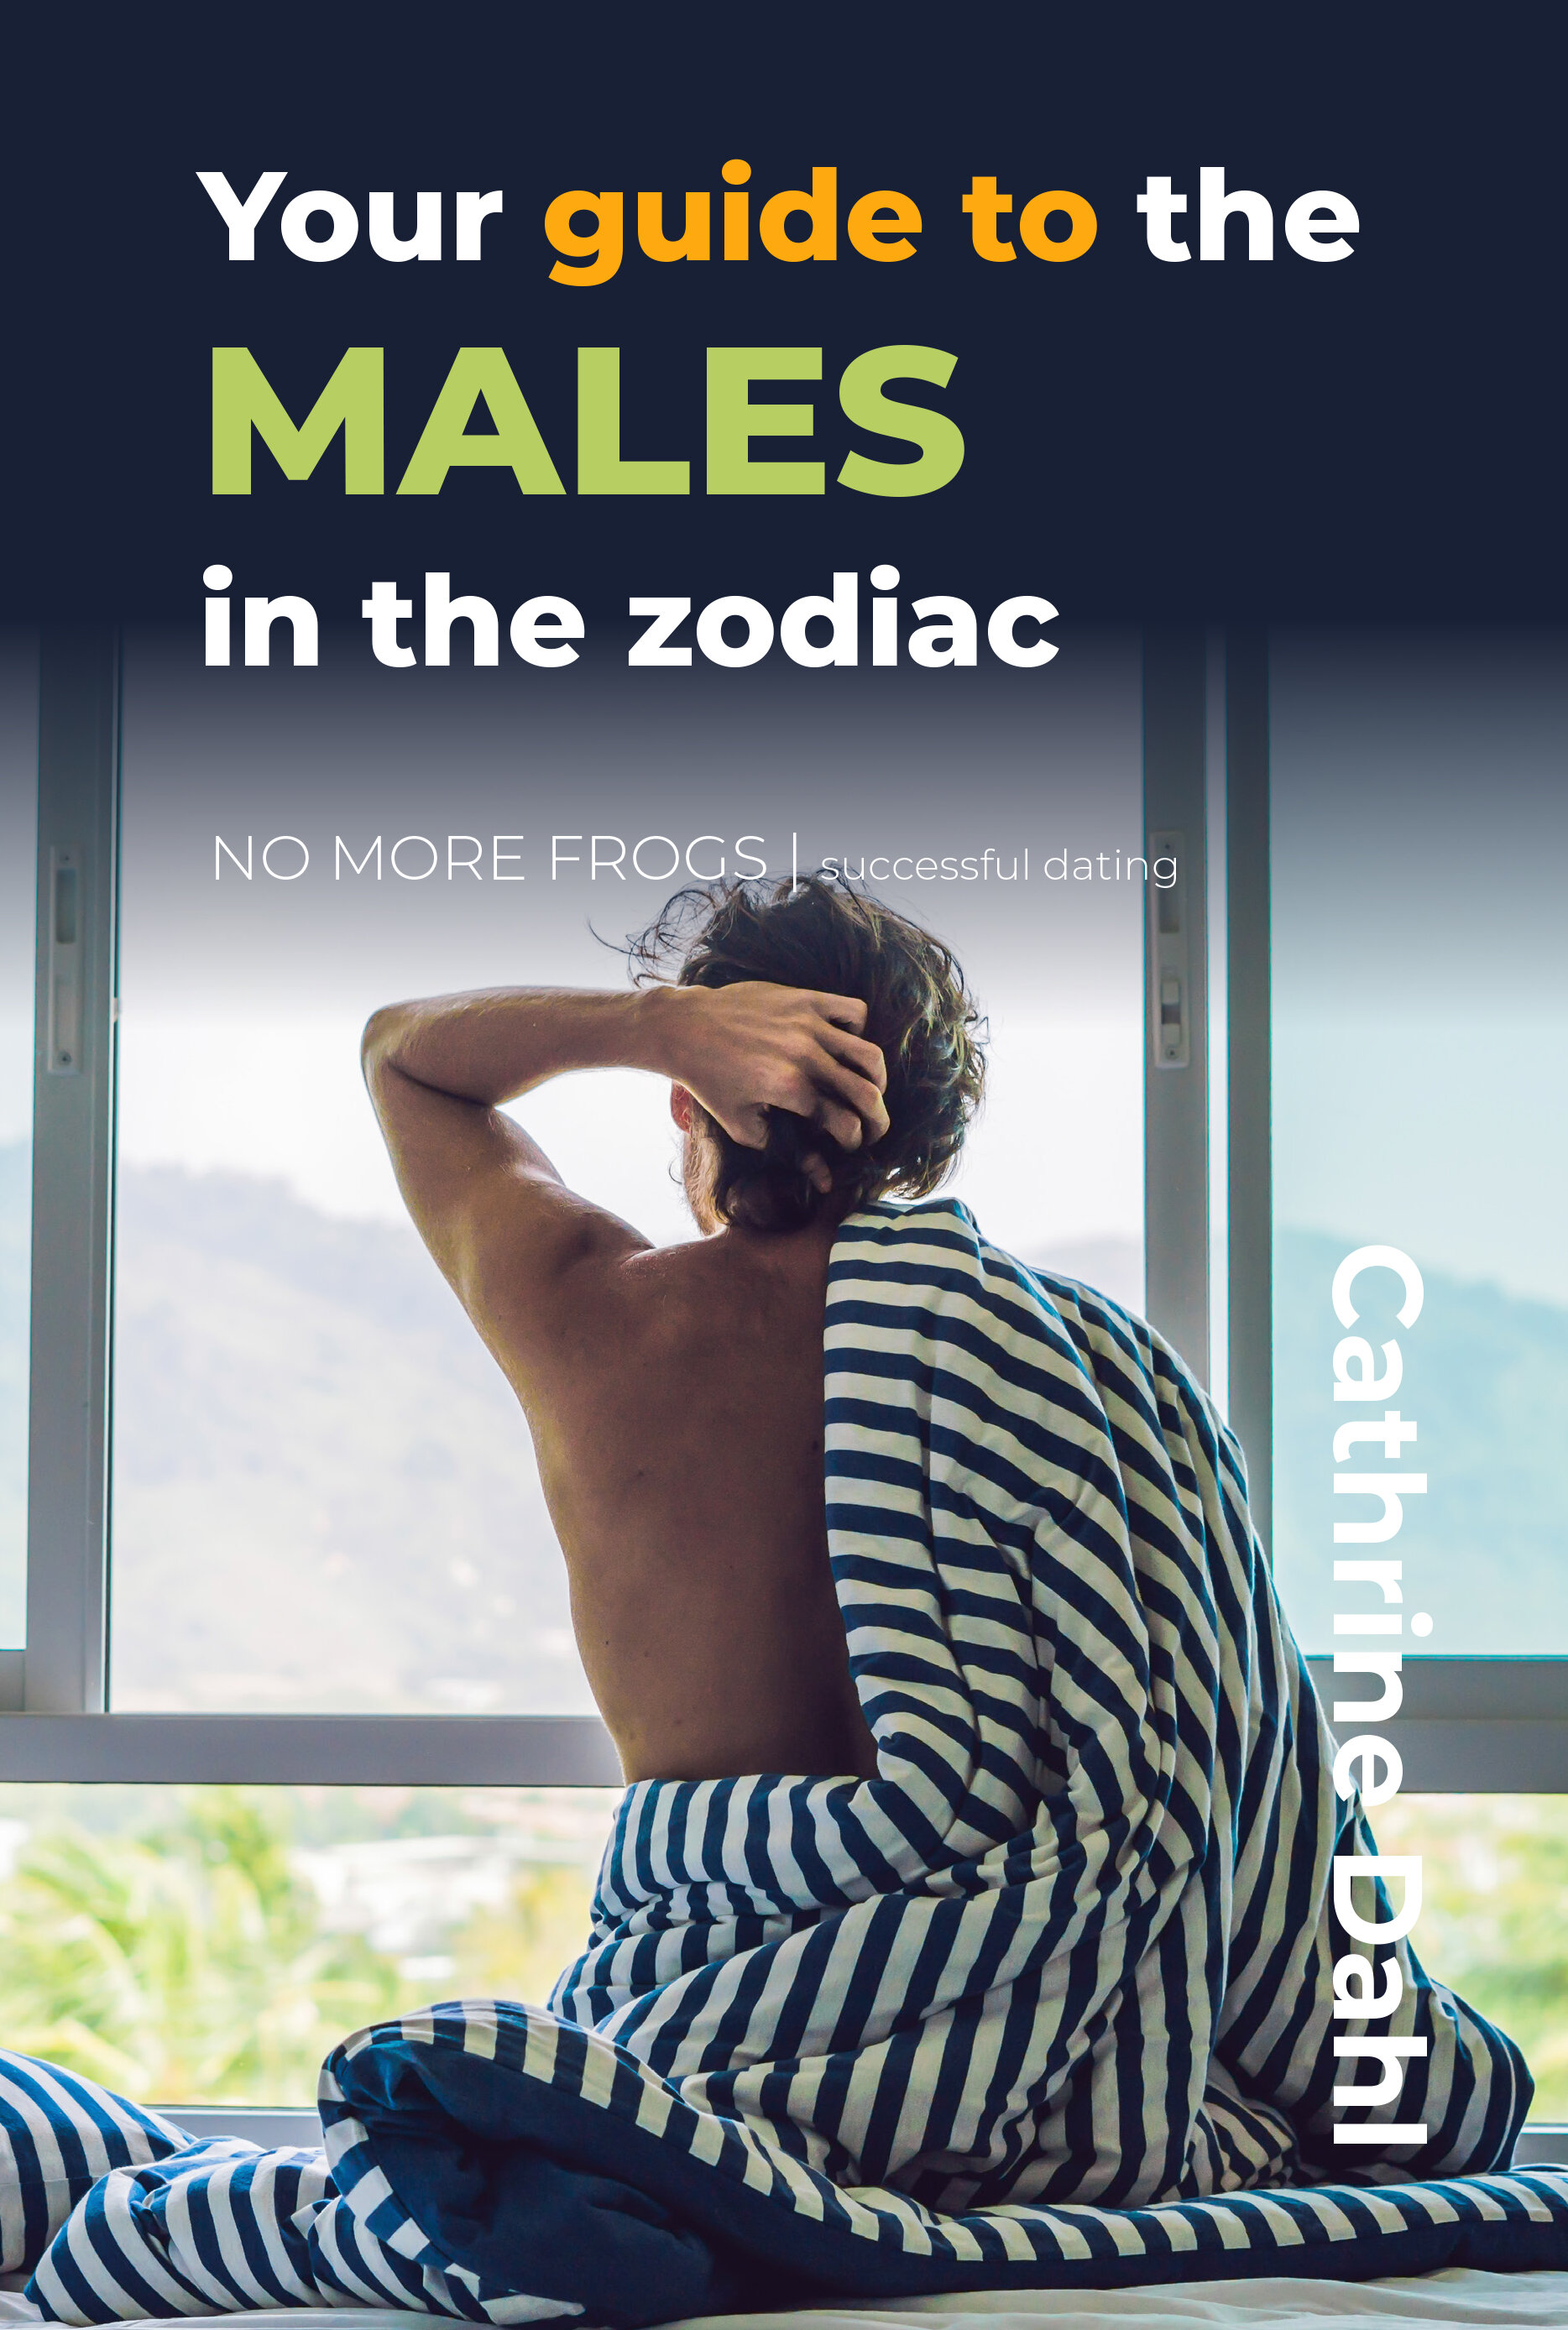 Get to know the men in the zodiac. Read about all the star signs. (Copy)